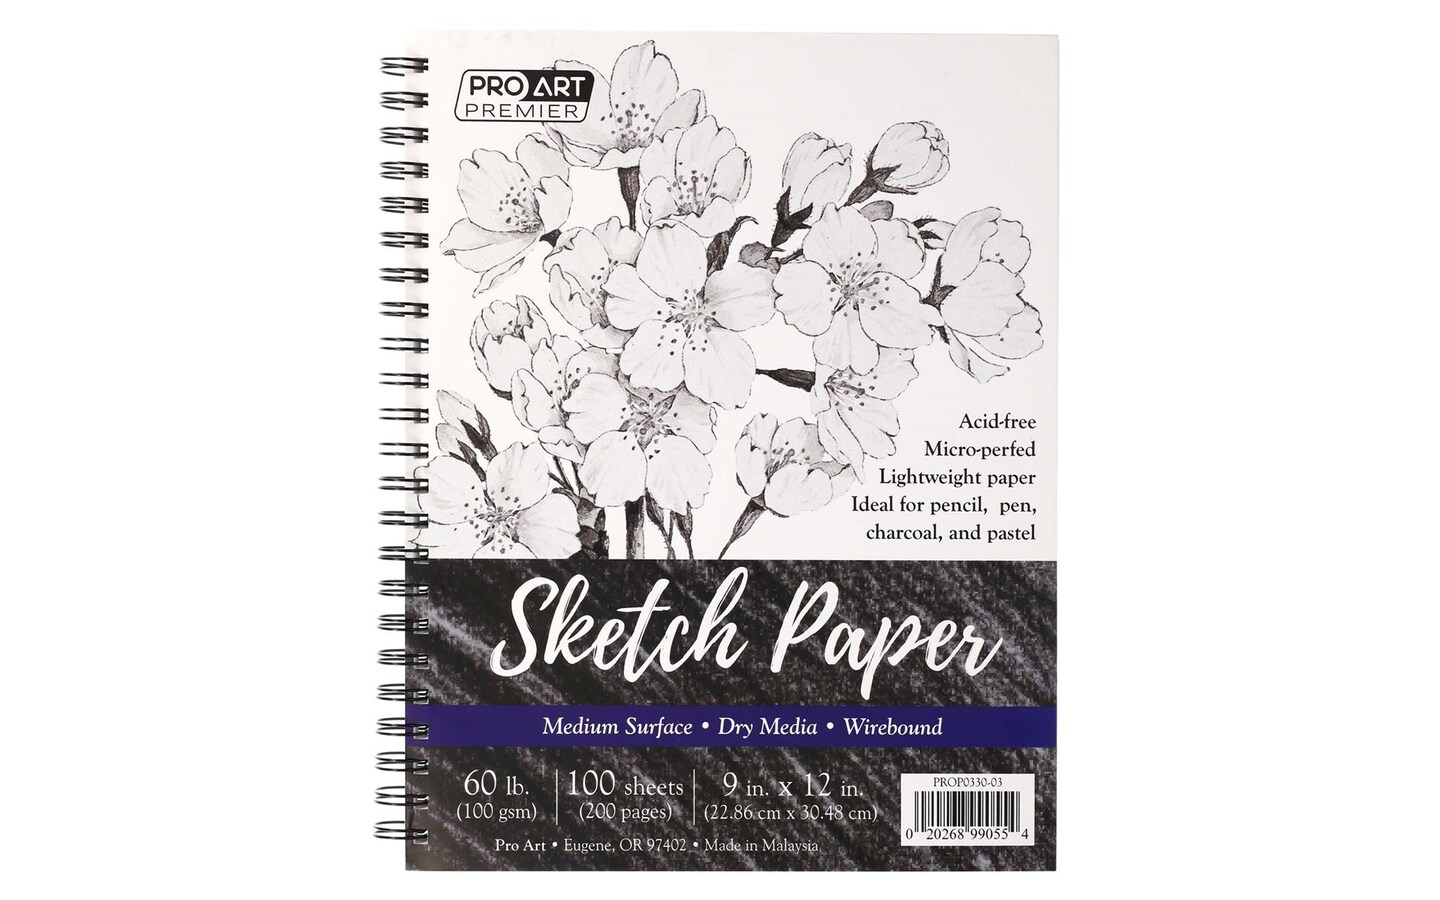 Pro Art Premium Sketch Paper Pad 9x12 100 sheets, 60#, Wire, Sketch Book,  Sketchbook, Drawing Pad, Sketch Pad, Drawing Paper, Art Book, Drawing Book,  Art Paper, Sketchbook for Drawing